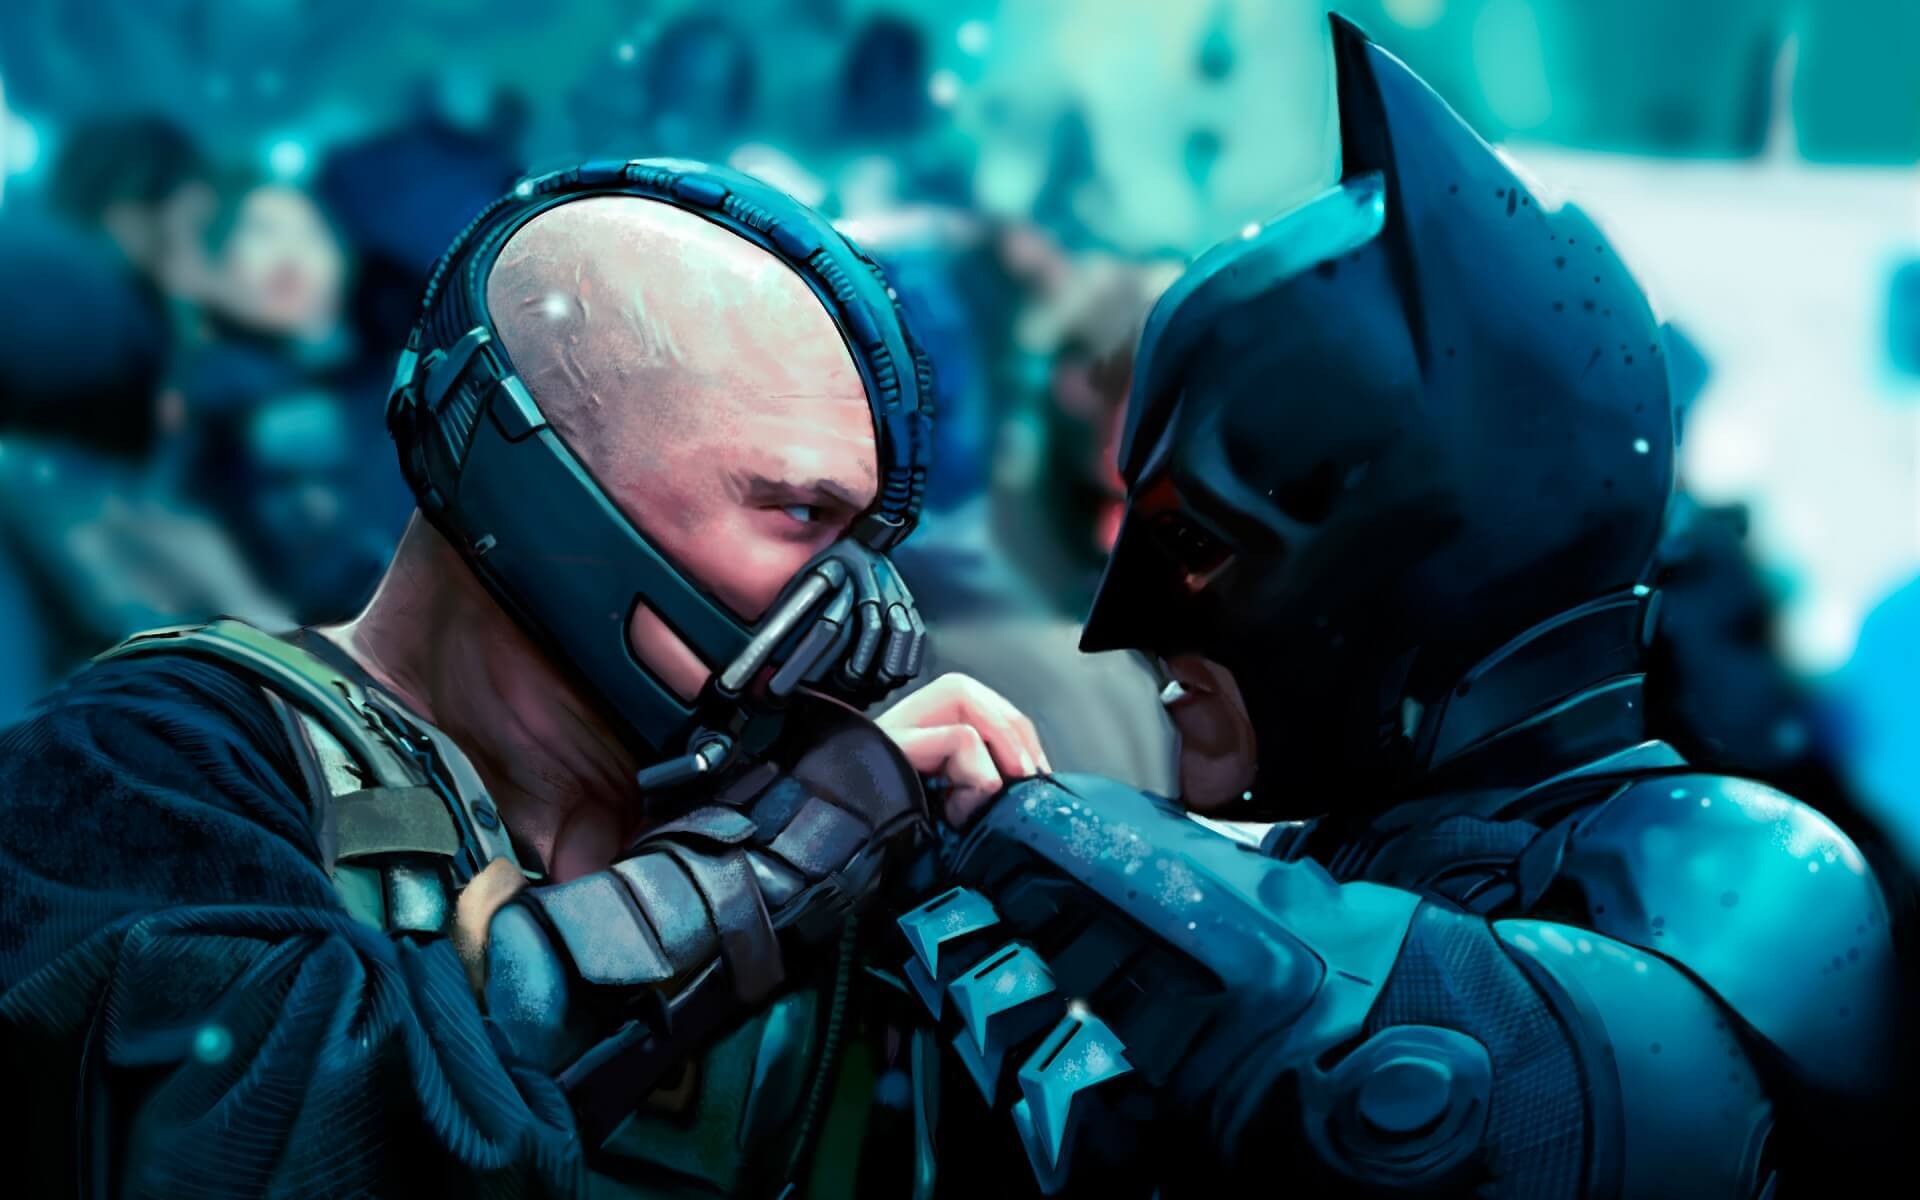 Best Bane Quotes In The Dark Knight Rises Ranked For Screenwriters